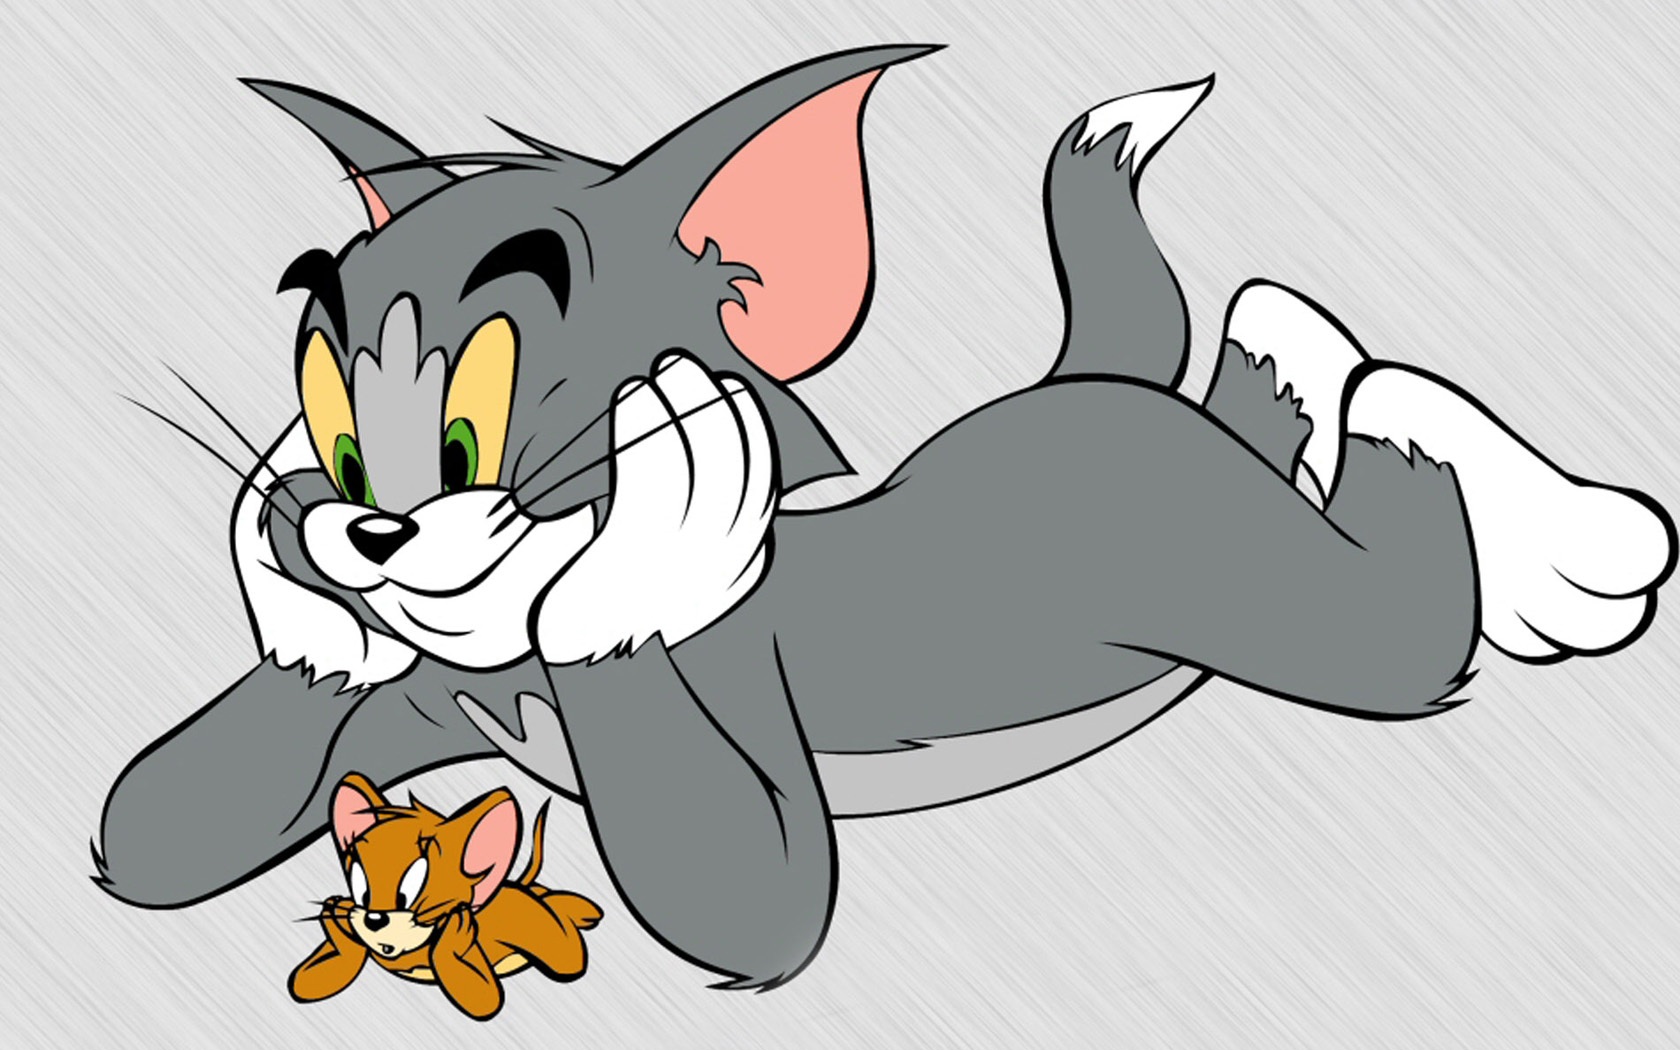 Tom and Jerry 5 - High Definition : Widescreen Wallpapers